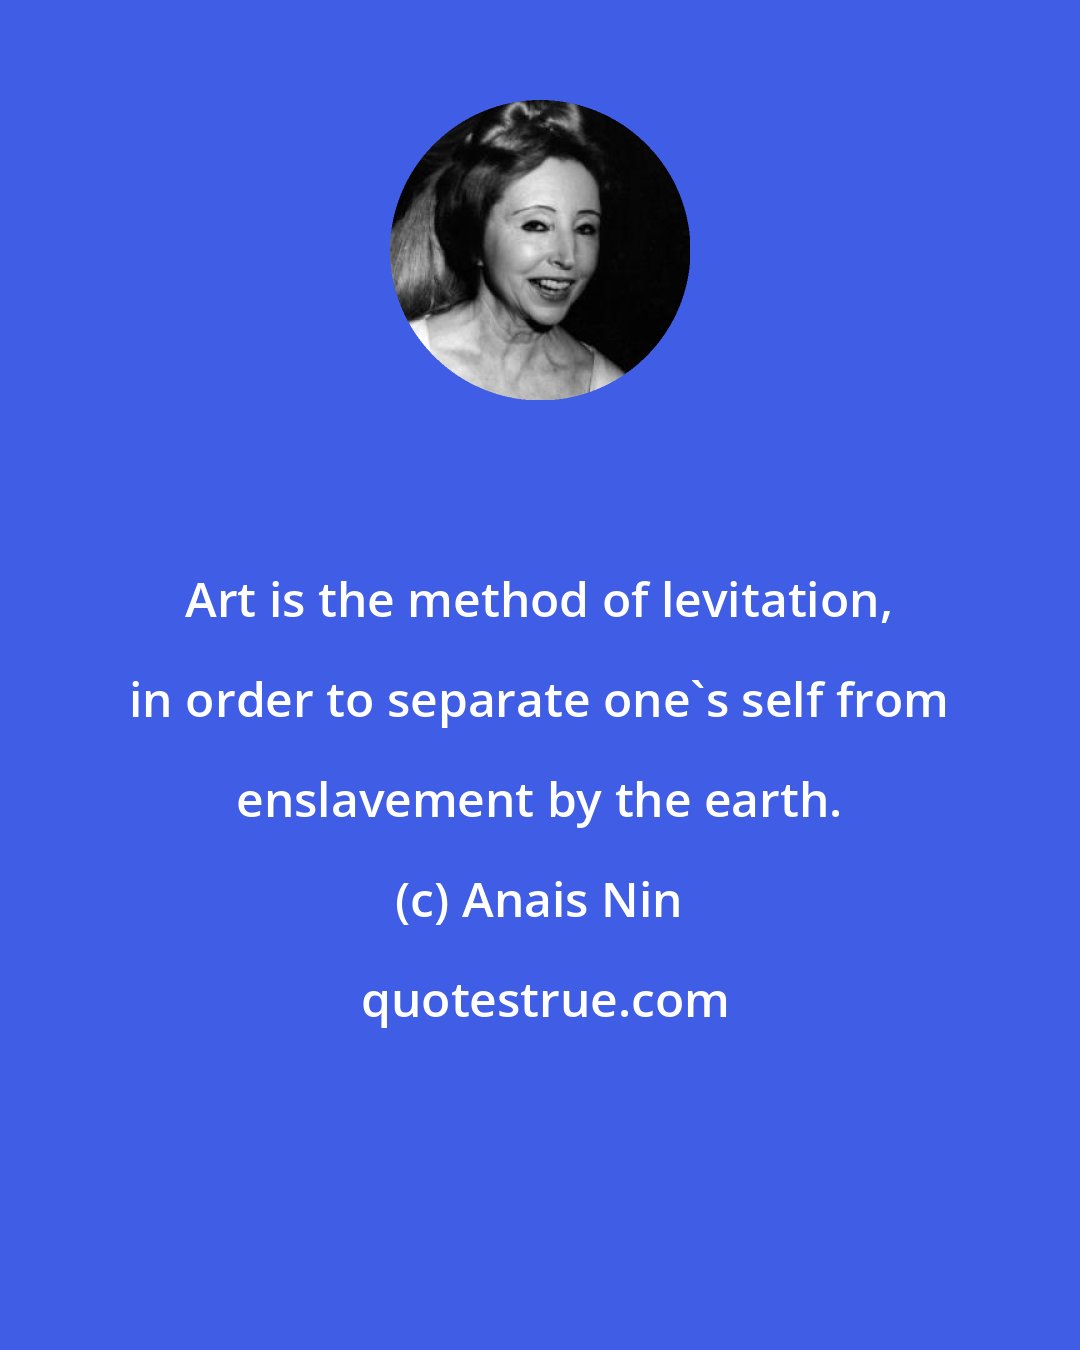 Anais Nin: Art is the method of levitation, in order to separate one's self from enslavement by the earth.